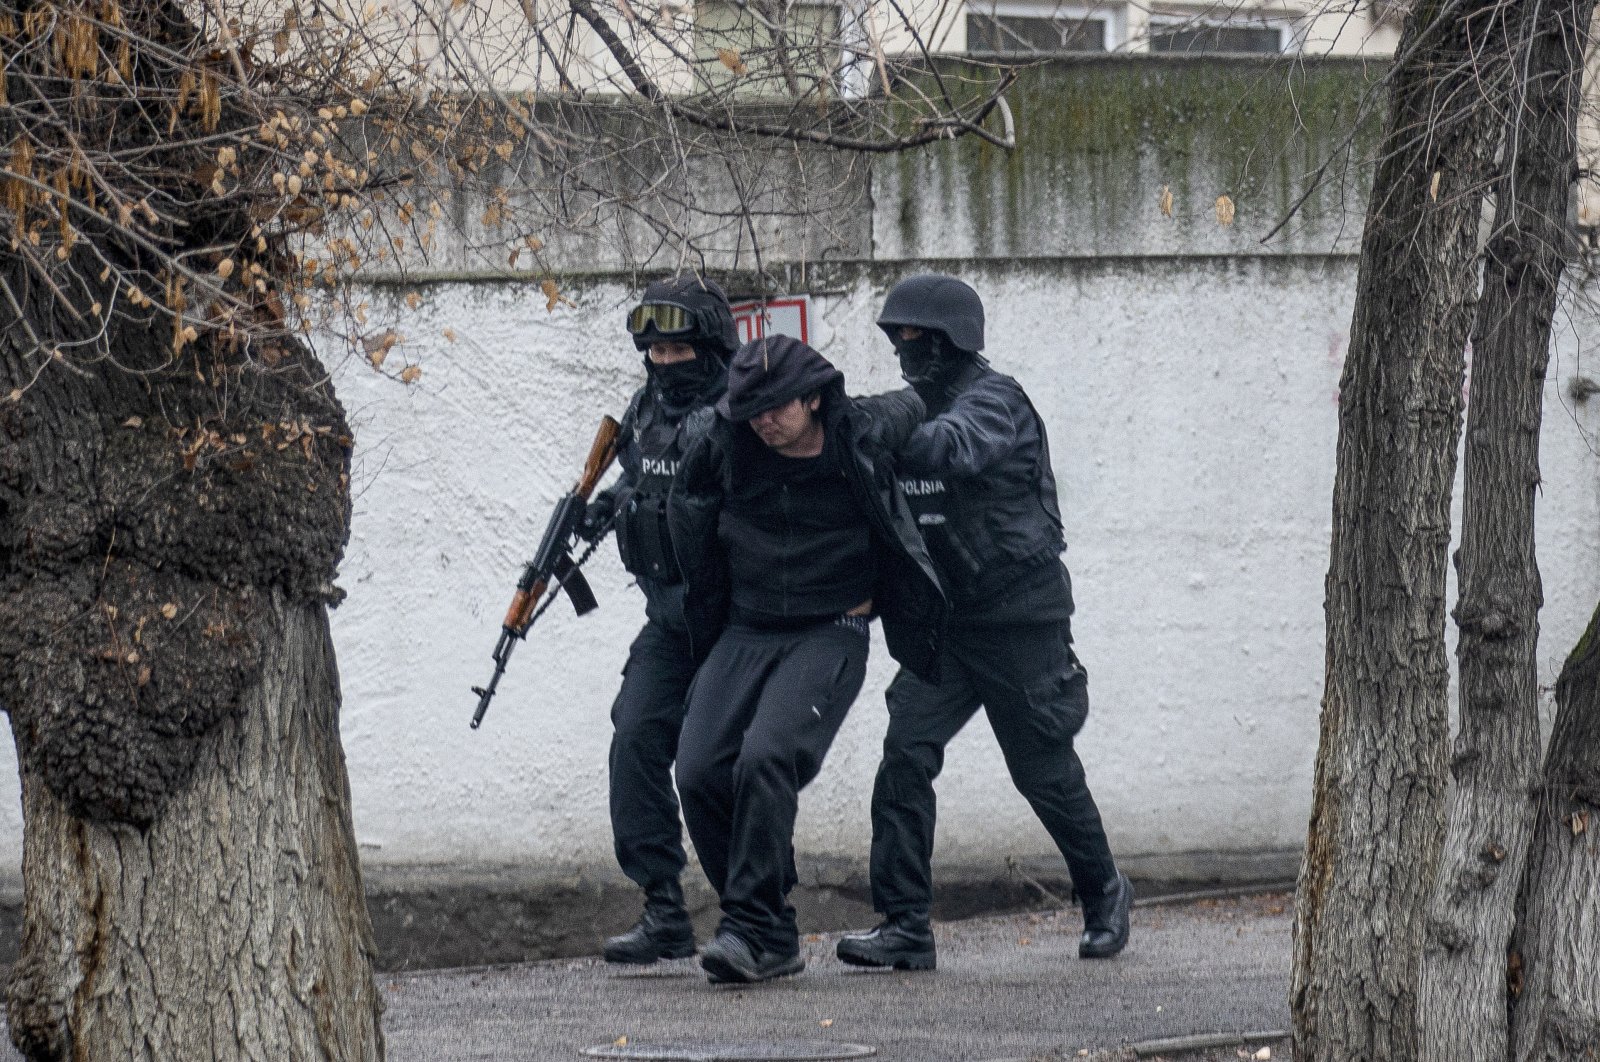 Armed riot police officers detain a protester during a security operation in a street after clashes in Almaty, Kazakhstan, Jan. 8, 2022. (AP Photo)